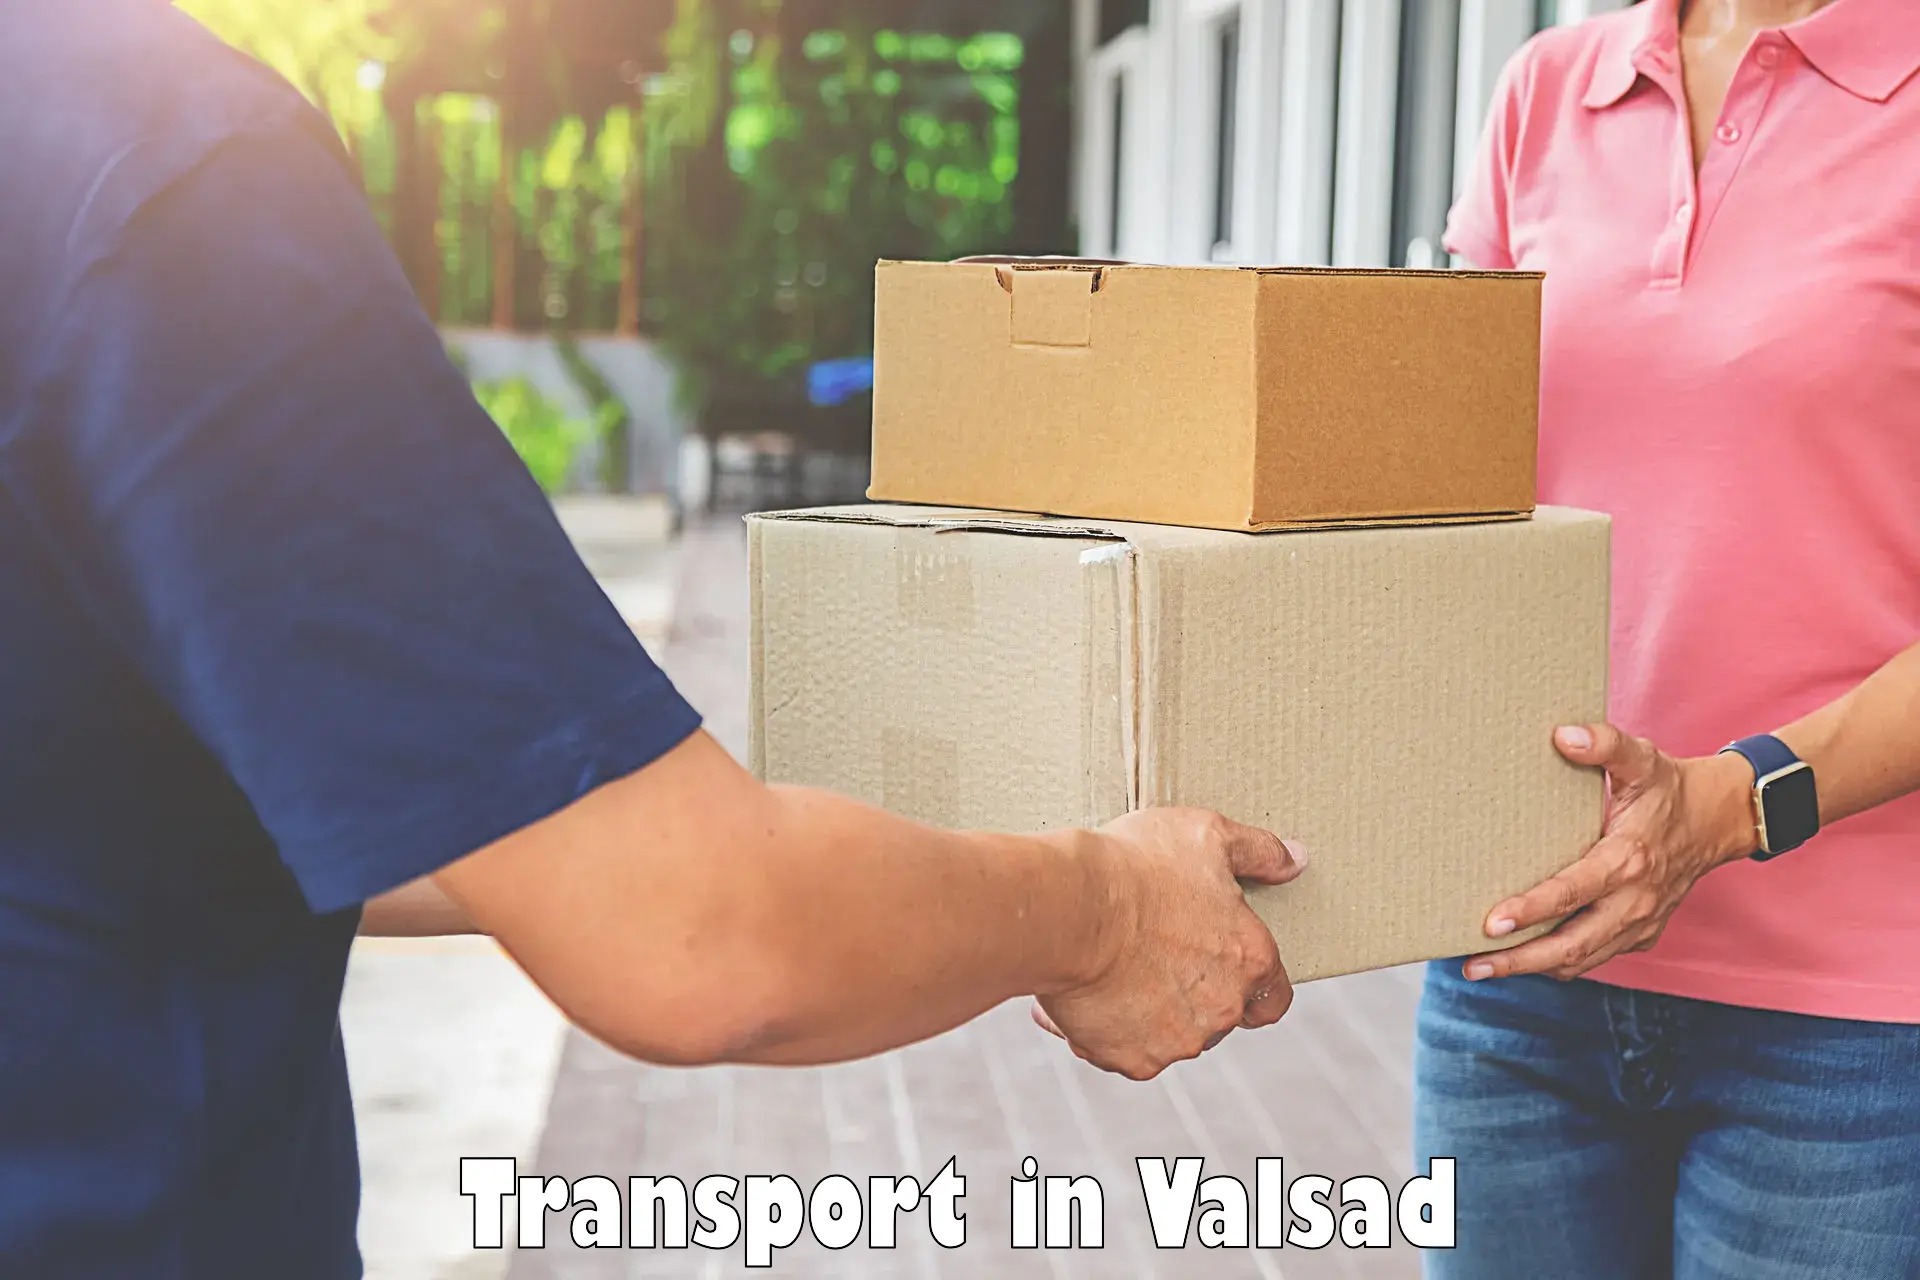 Air freight transport services in Valsad